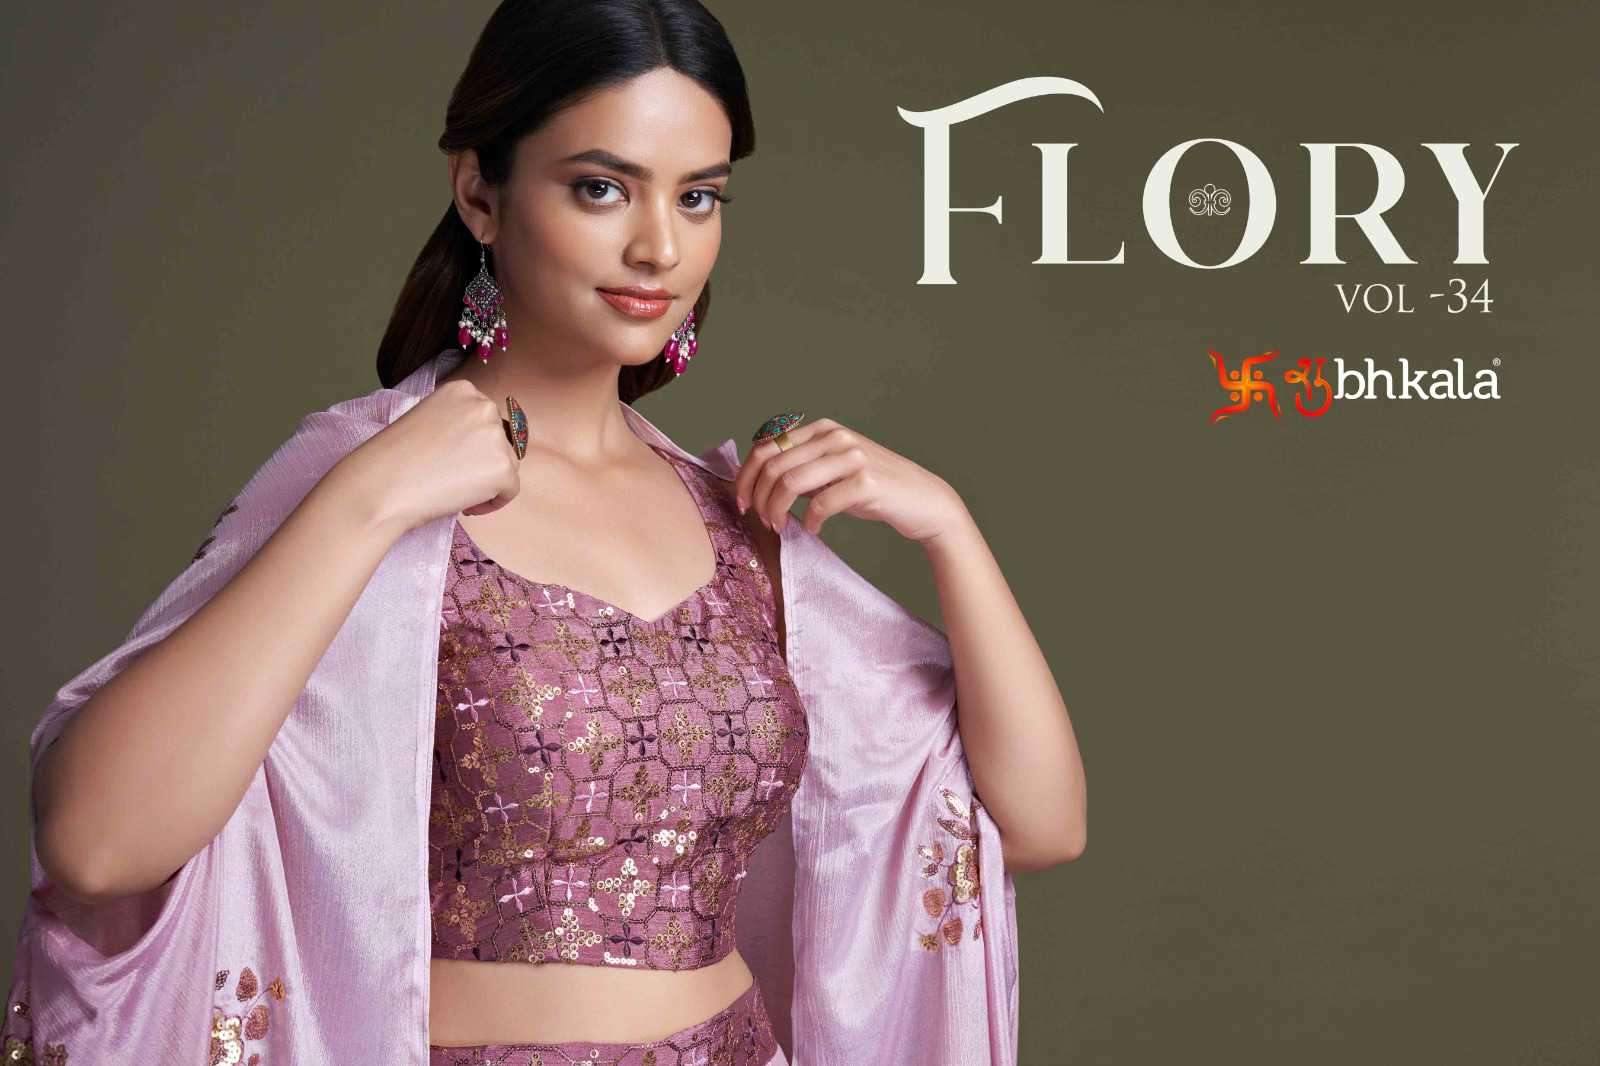 Shubhkala Flory Vol 34 Exclusive Shrug Style 3 Piece Stylish Western Outfit